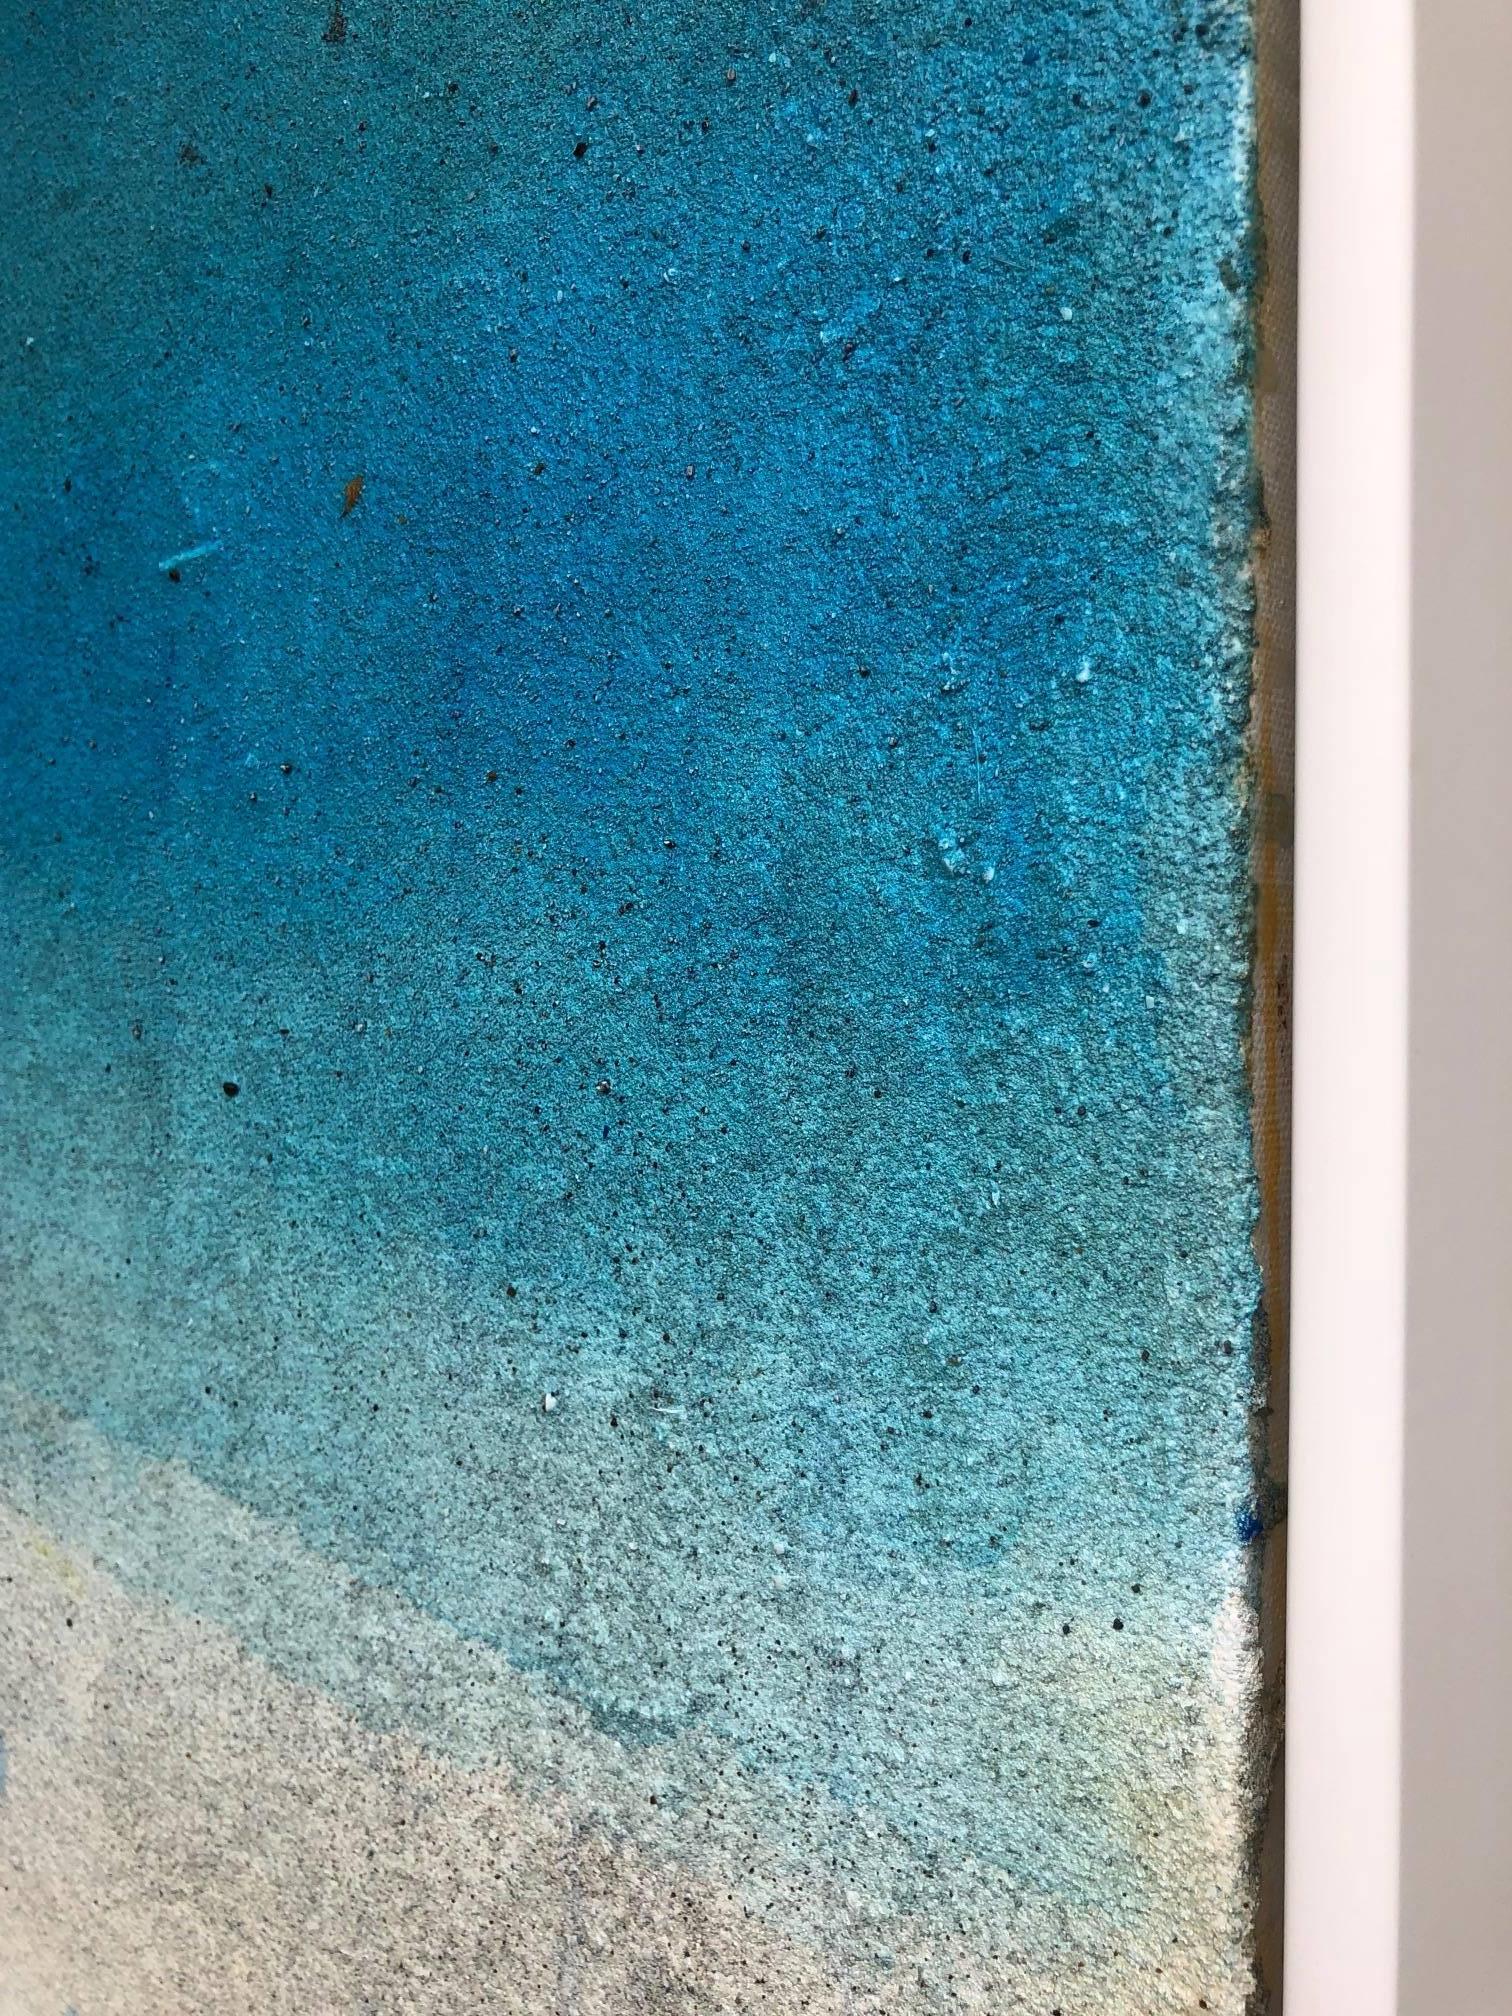 Mainly blue Rothko-esque color field painting that delights from a distance and up close from Swedish-American visual artist Charlotte Bernstrom, who creates acrylic paintings that are poetic explorations depicting nature and humanity’s place within